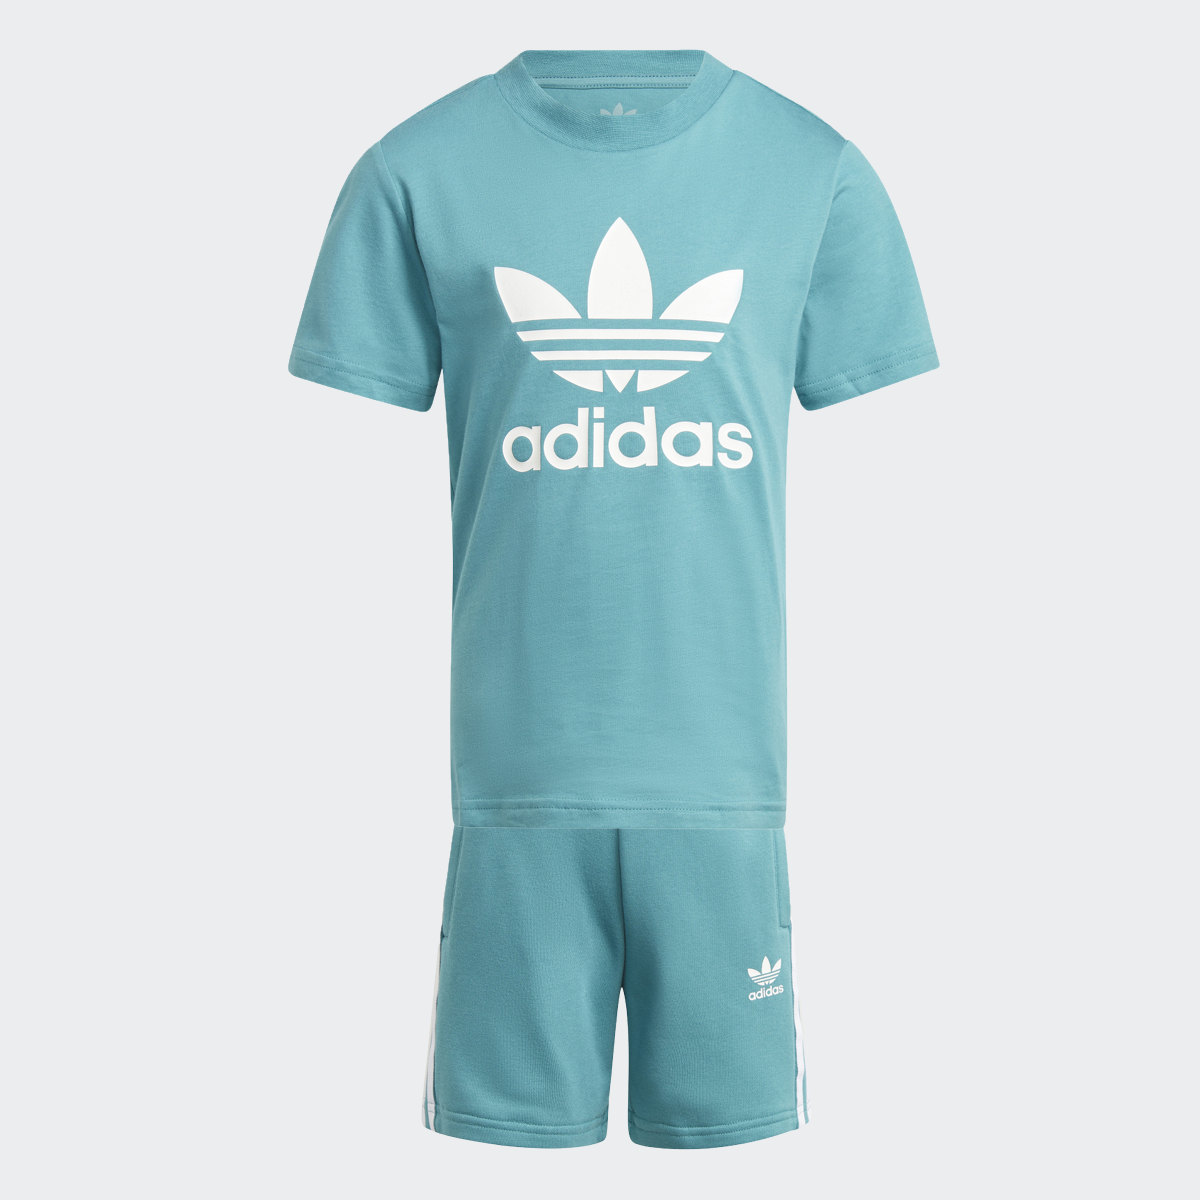 Adidas Completo adicolor Shorts and Tee. 4